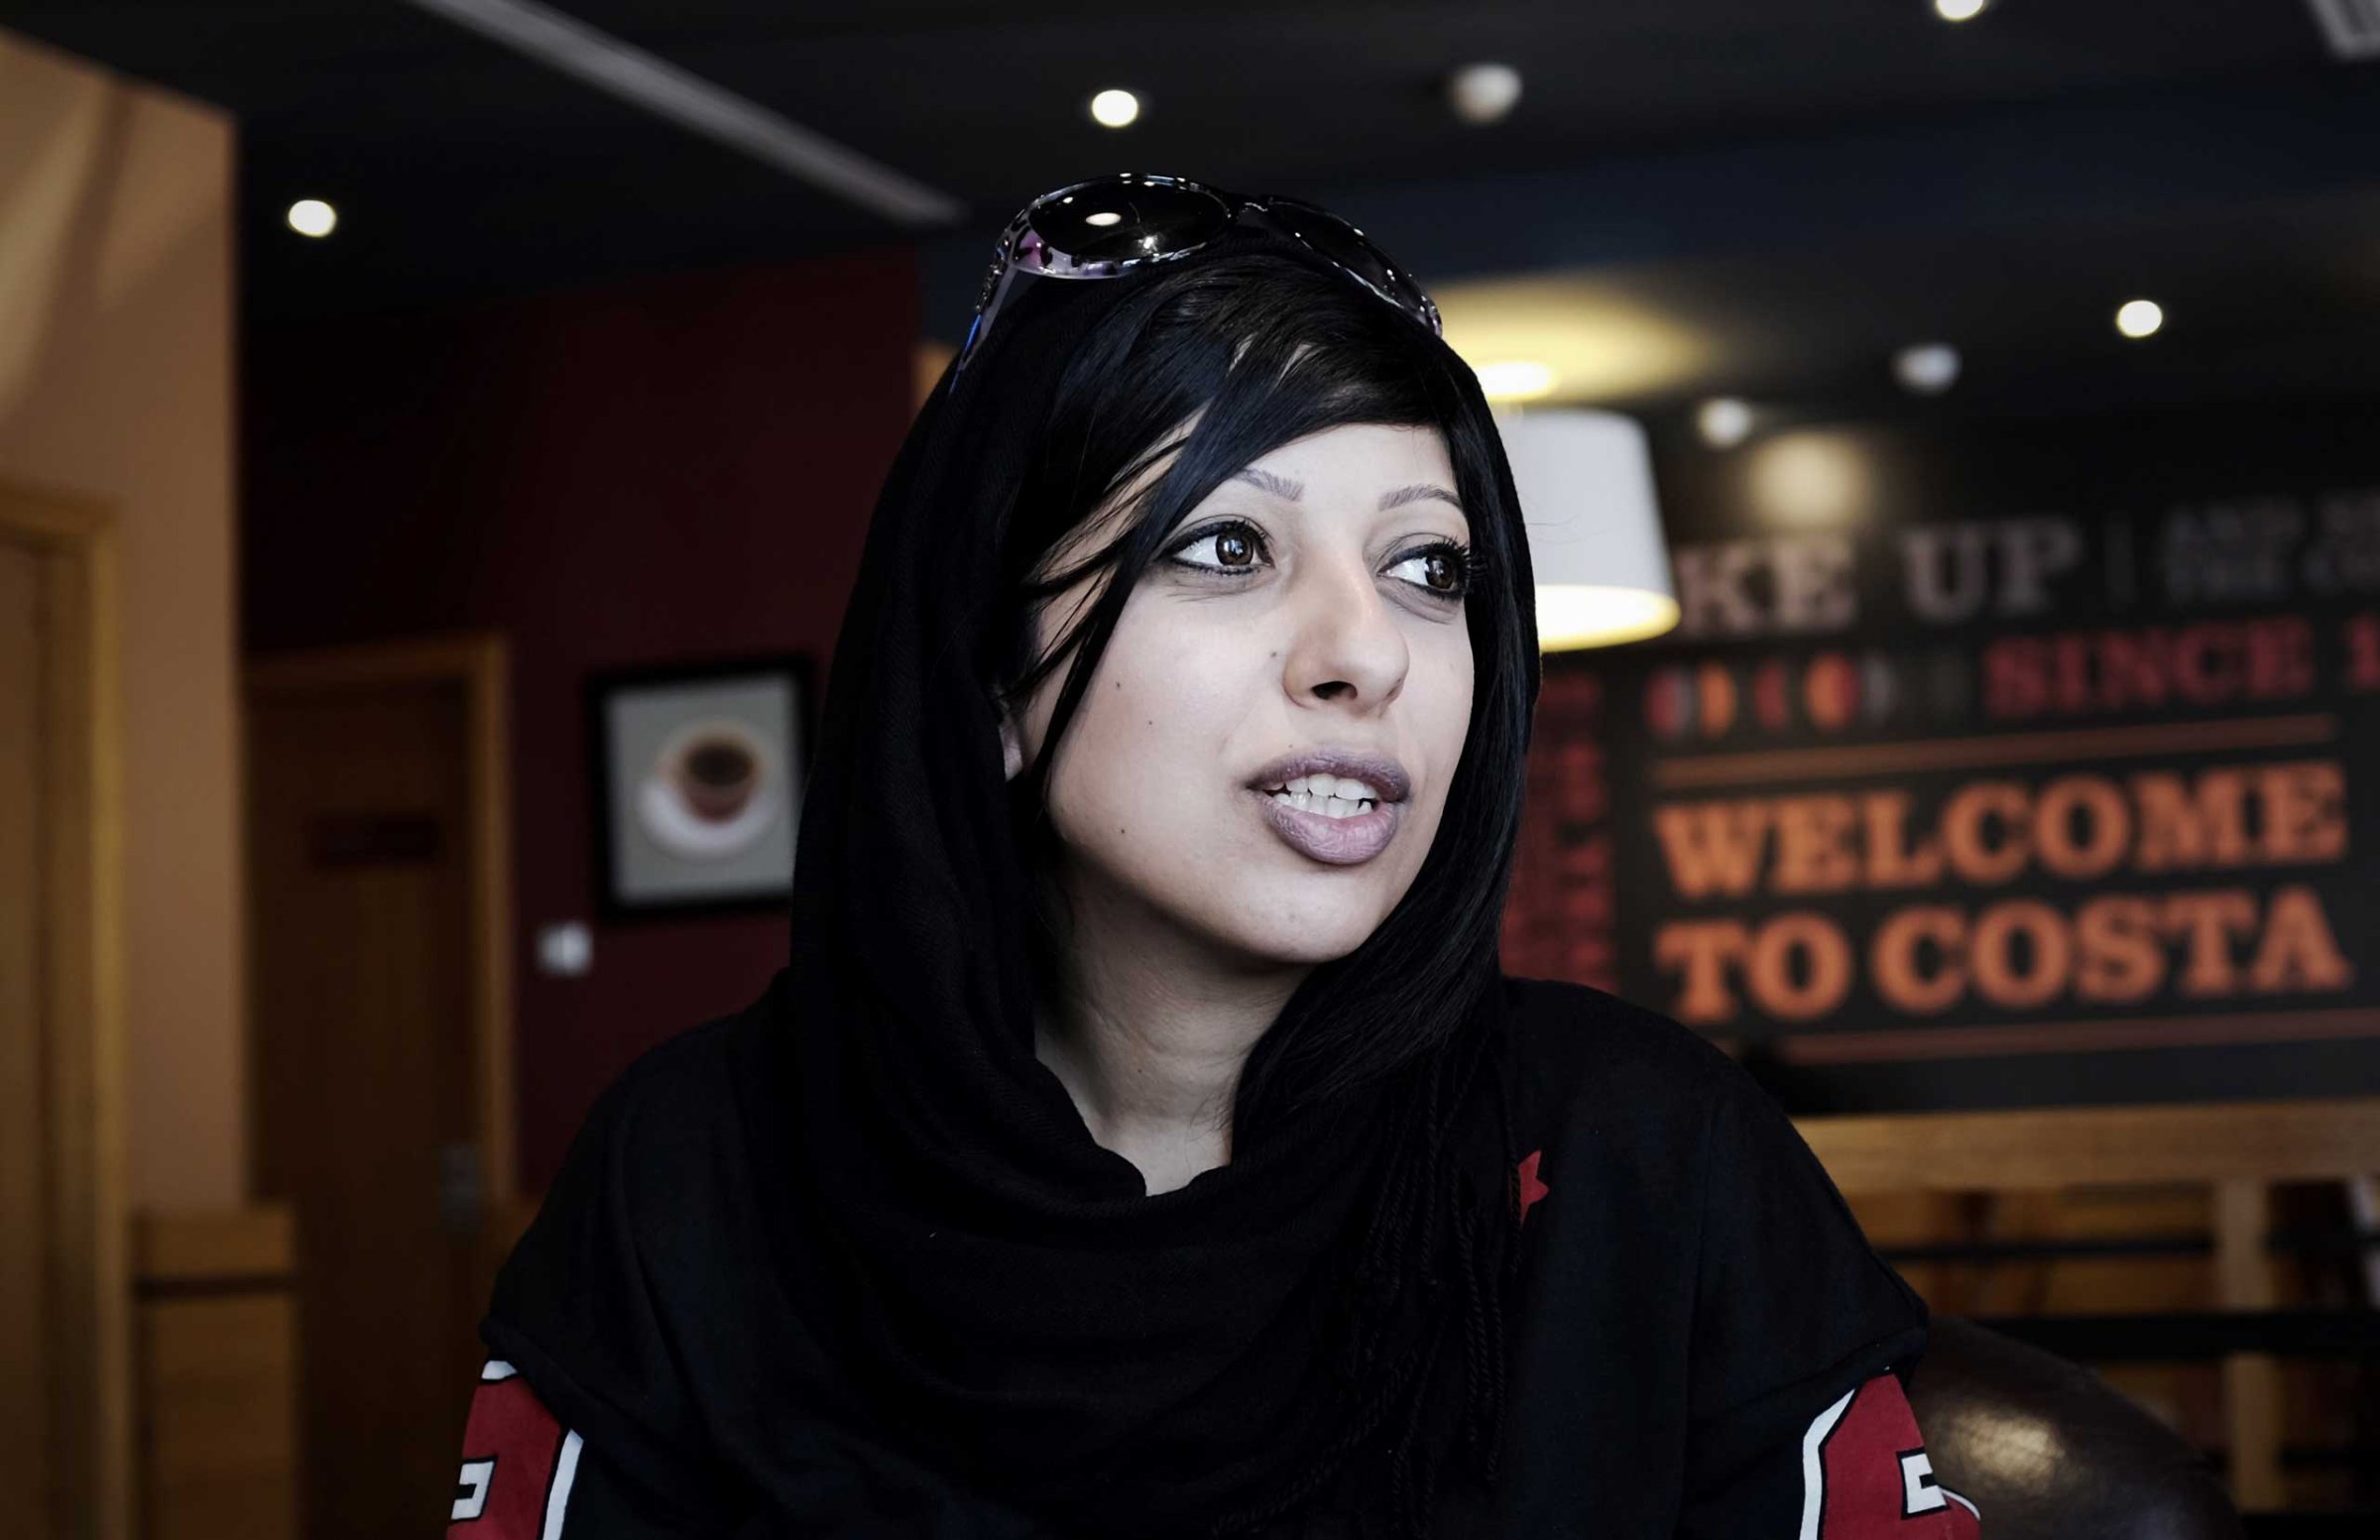 Bahraini human rights activist Zainab al-Khawaja, sister of jailed prominent rights activist Maryam al-Khawaja, sits at a cafe near the Bahrain court building after she was barred by authorities from attending the hearing, in the capital Manama on Sept. 6, 2014.